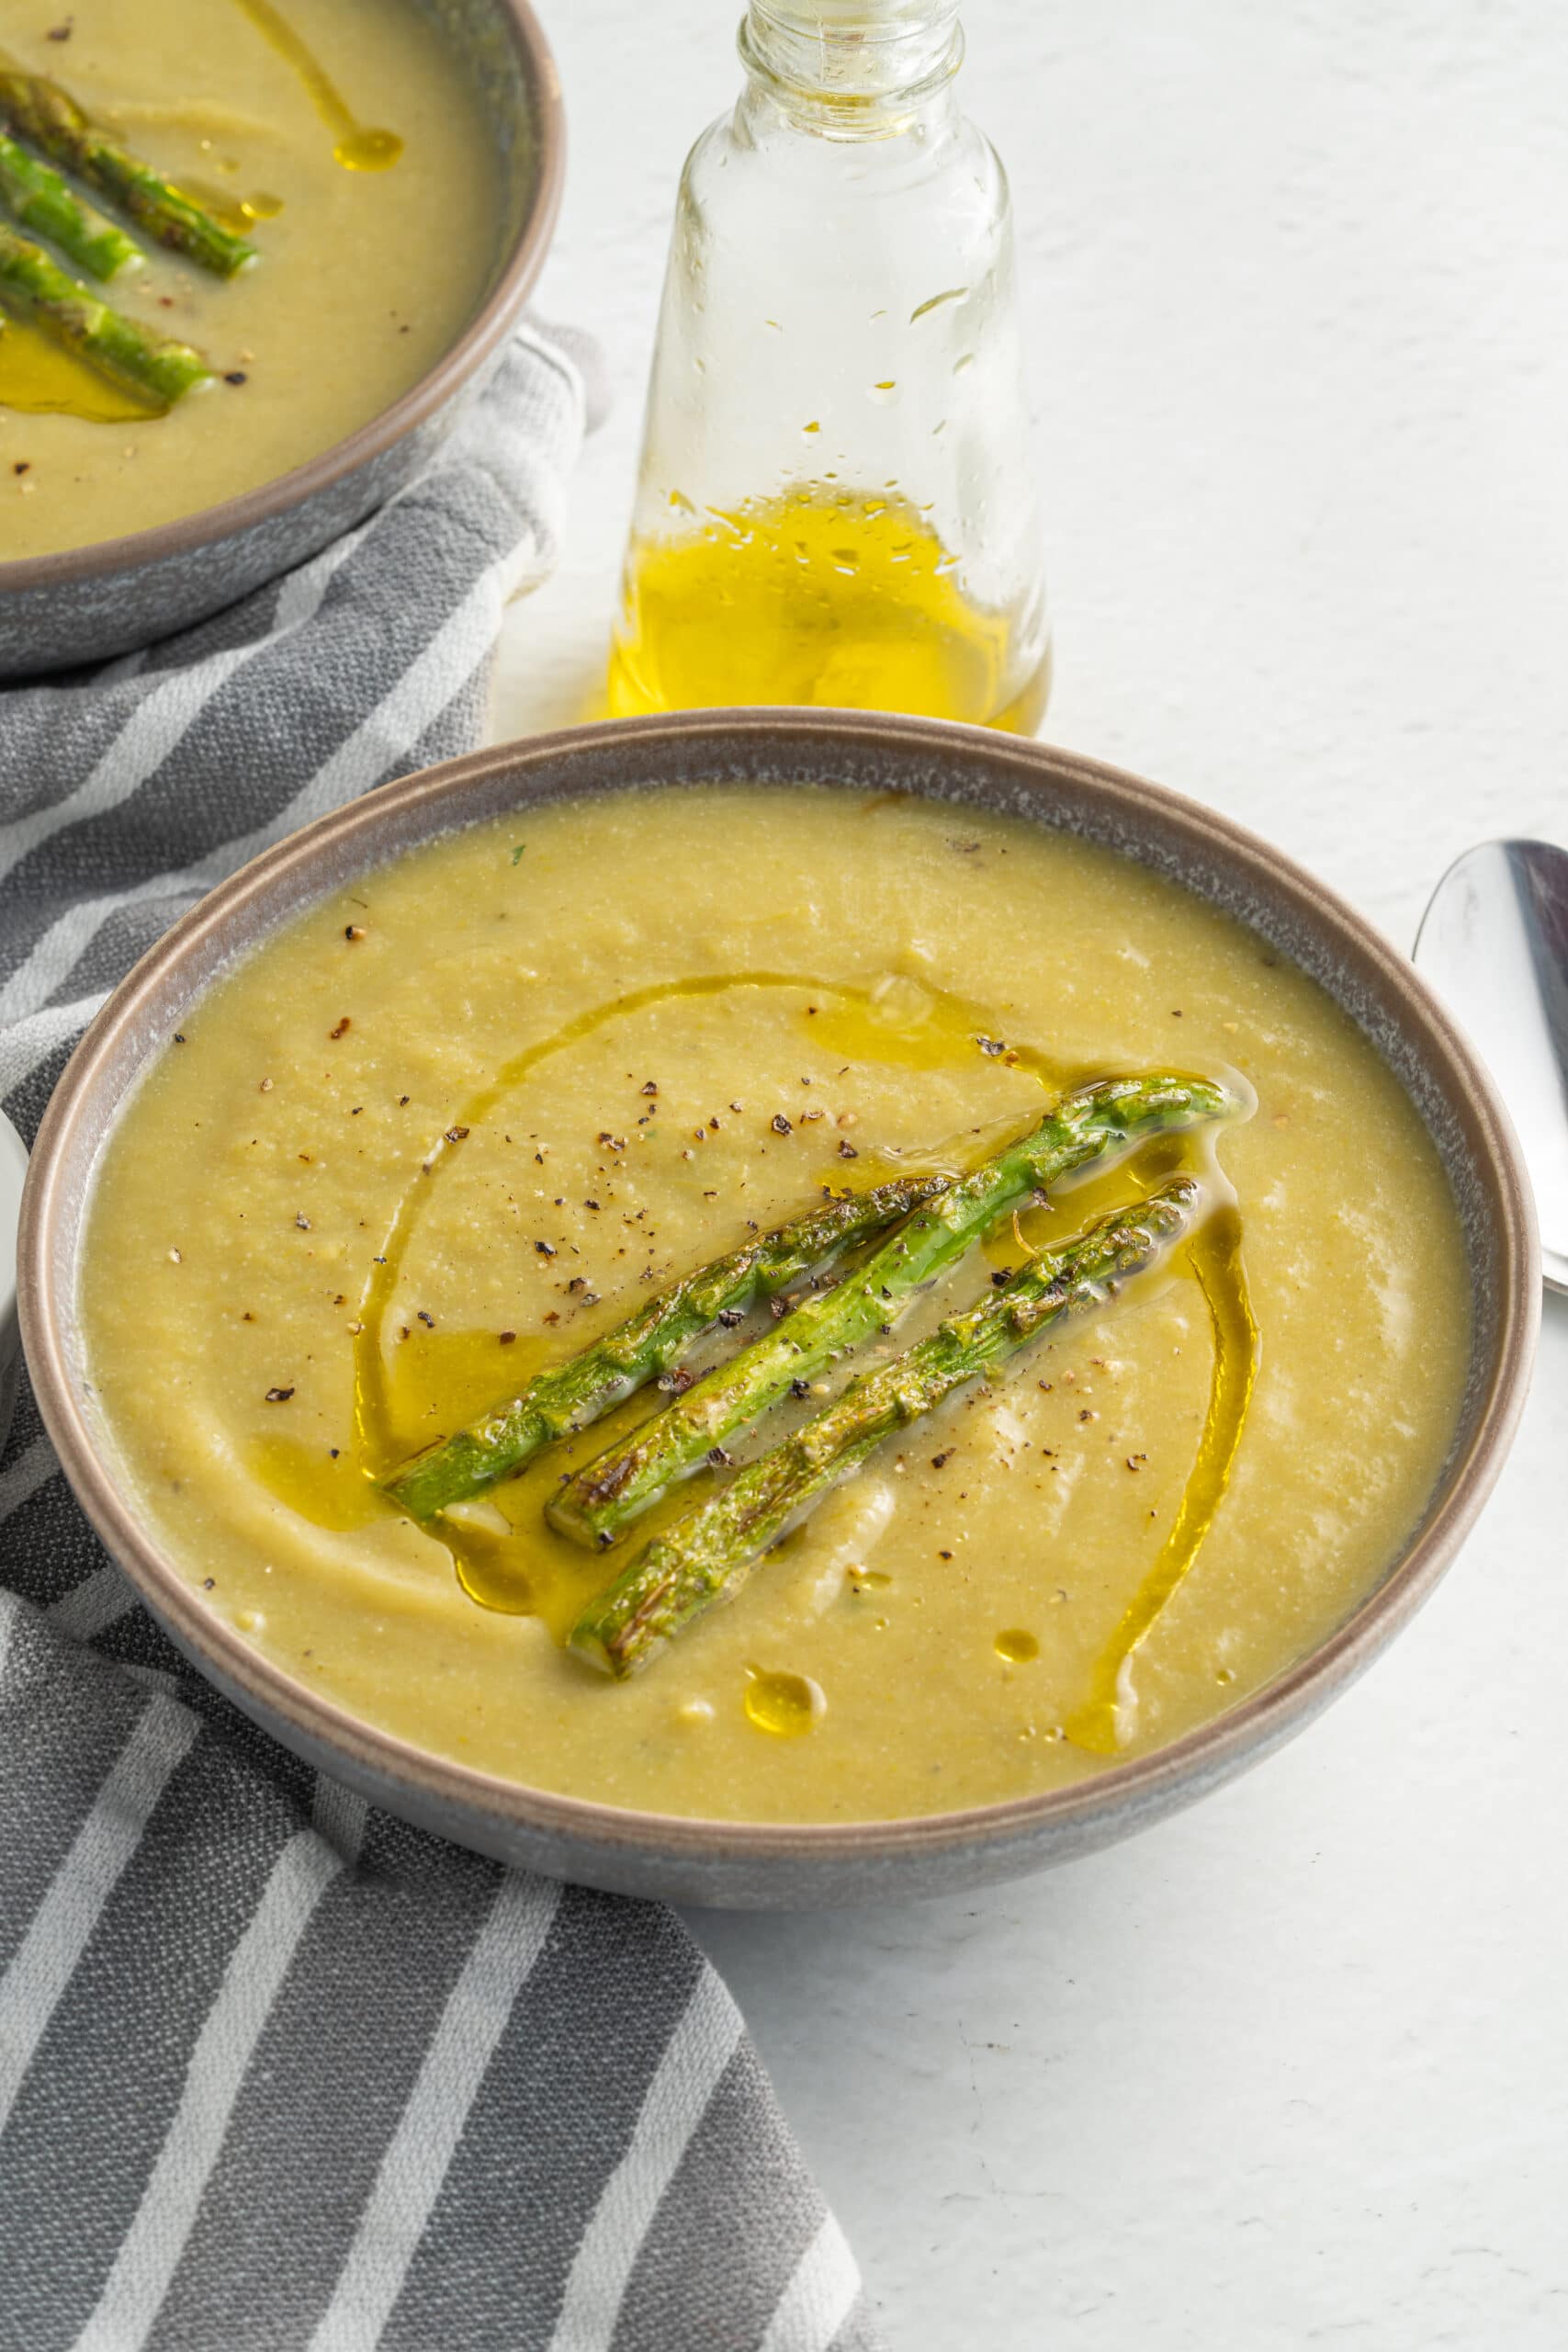 Creamy asparagus coup in a grey bowl with three asparagus spears in the middle and a grey and white striped towel to the left of it.